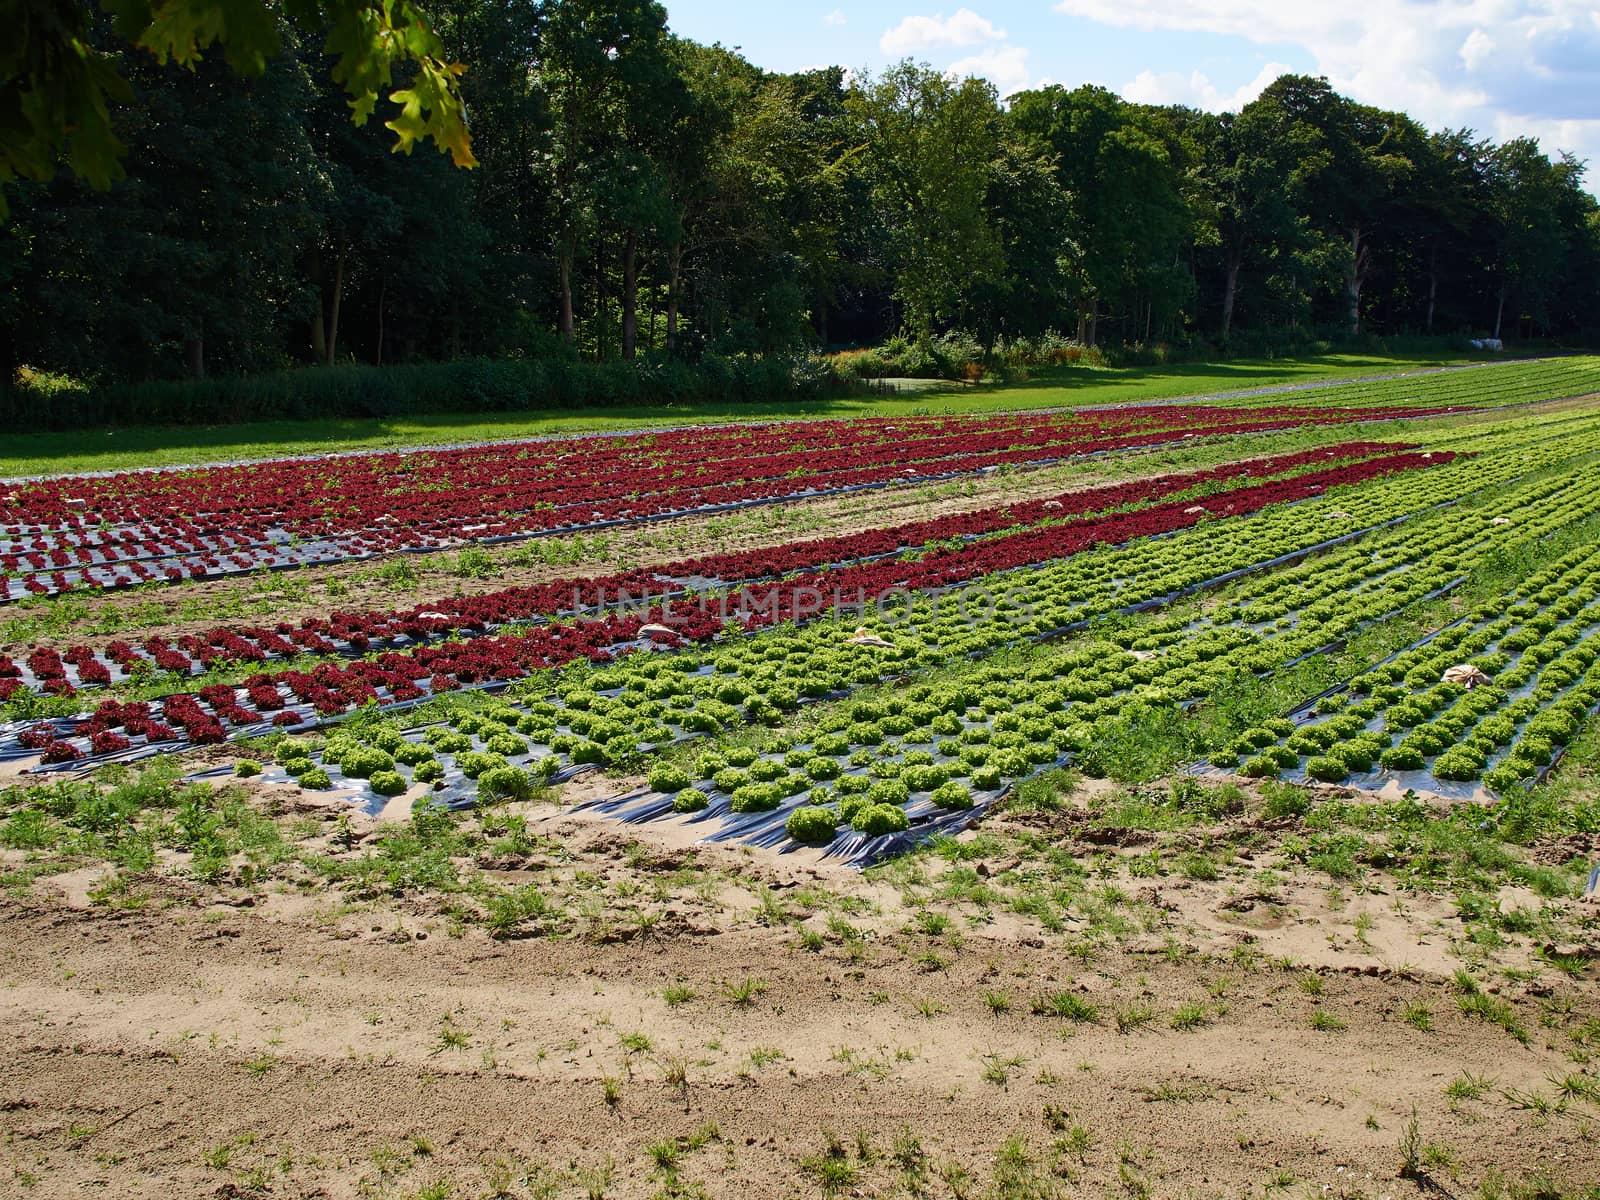 Cultivated field of Salad Green and Red Lettuce by Ronyzmbow